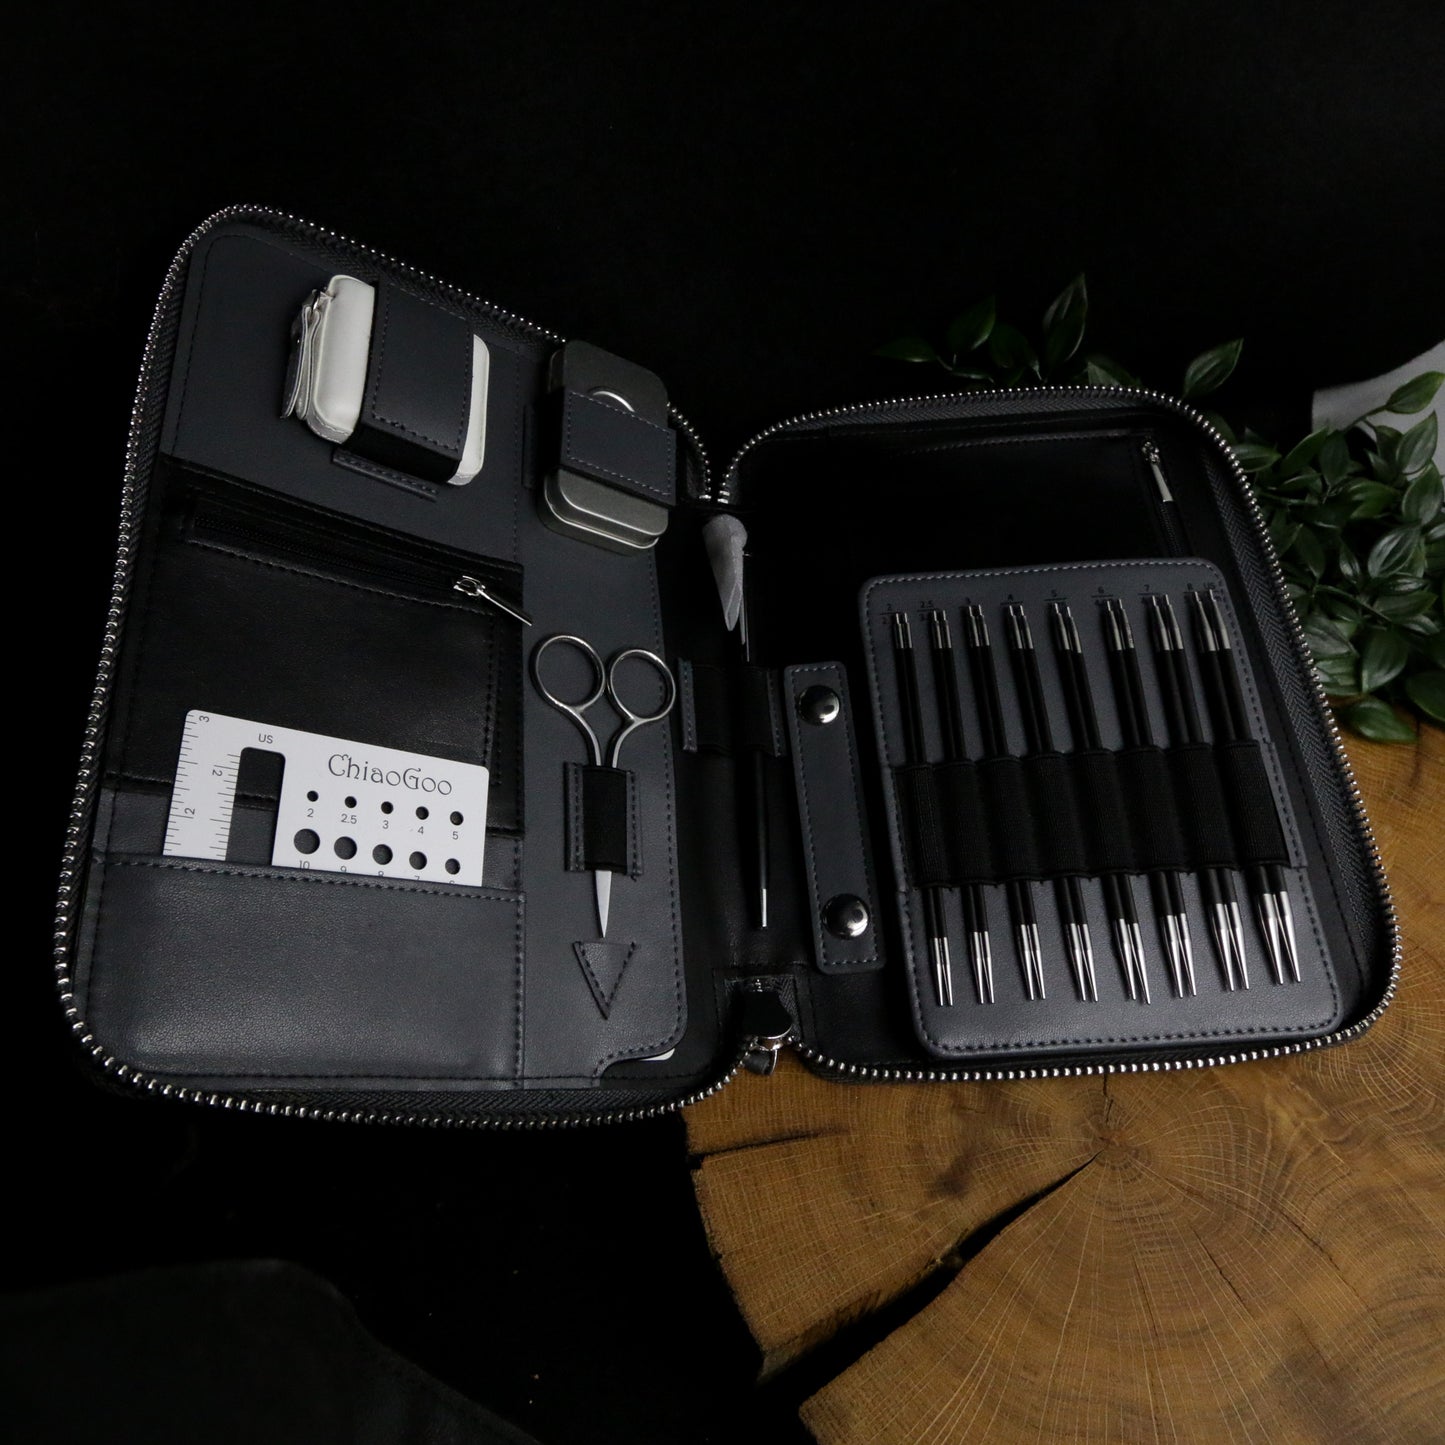 Forte 2.0 Special Edition Interchangeable Needle Set